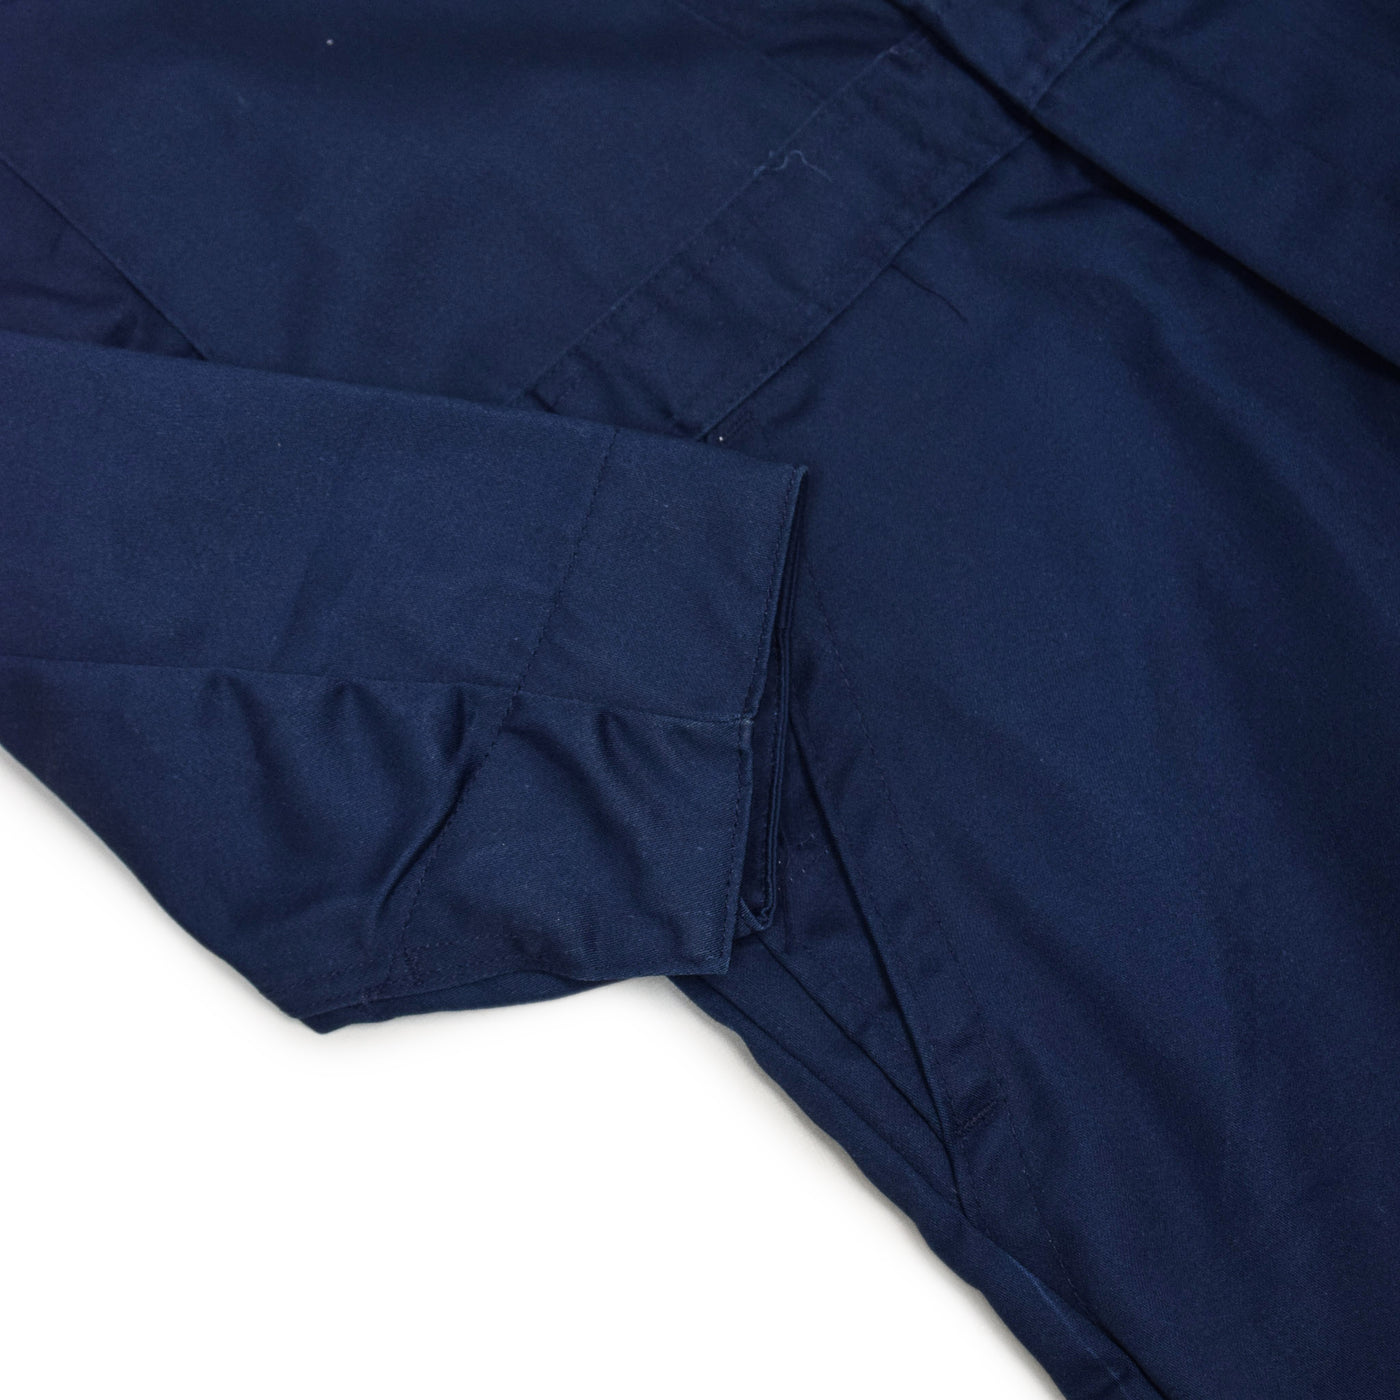 Vintage Dickies Workwear Coverall Navy Blue Cotton Blend Boiler Suit S / M-CUFF